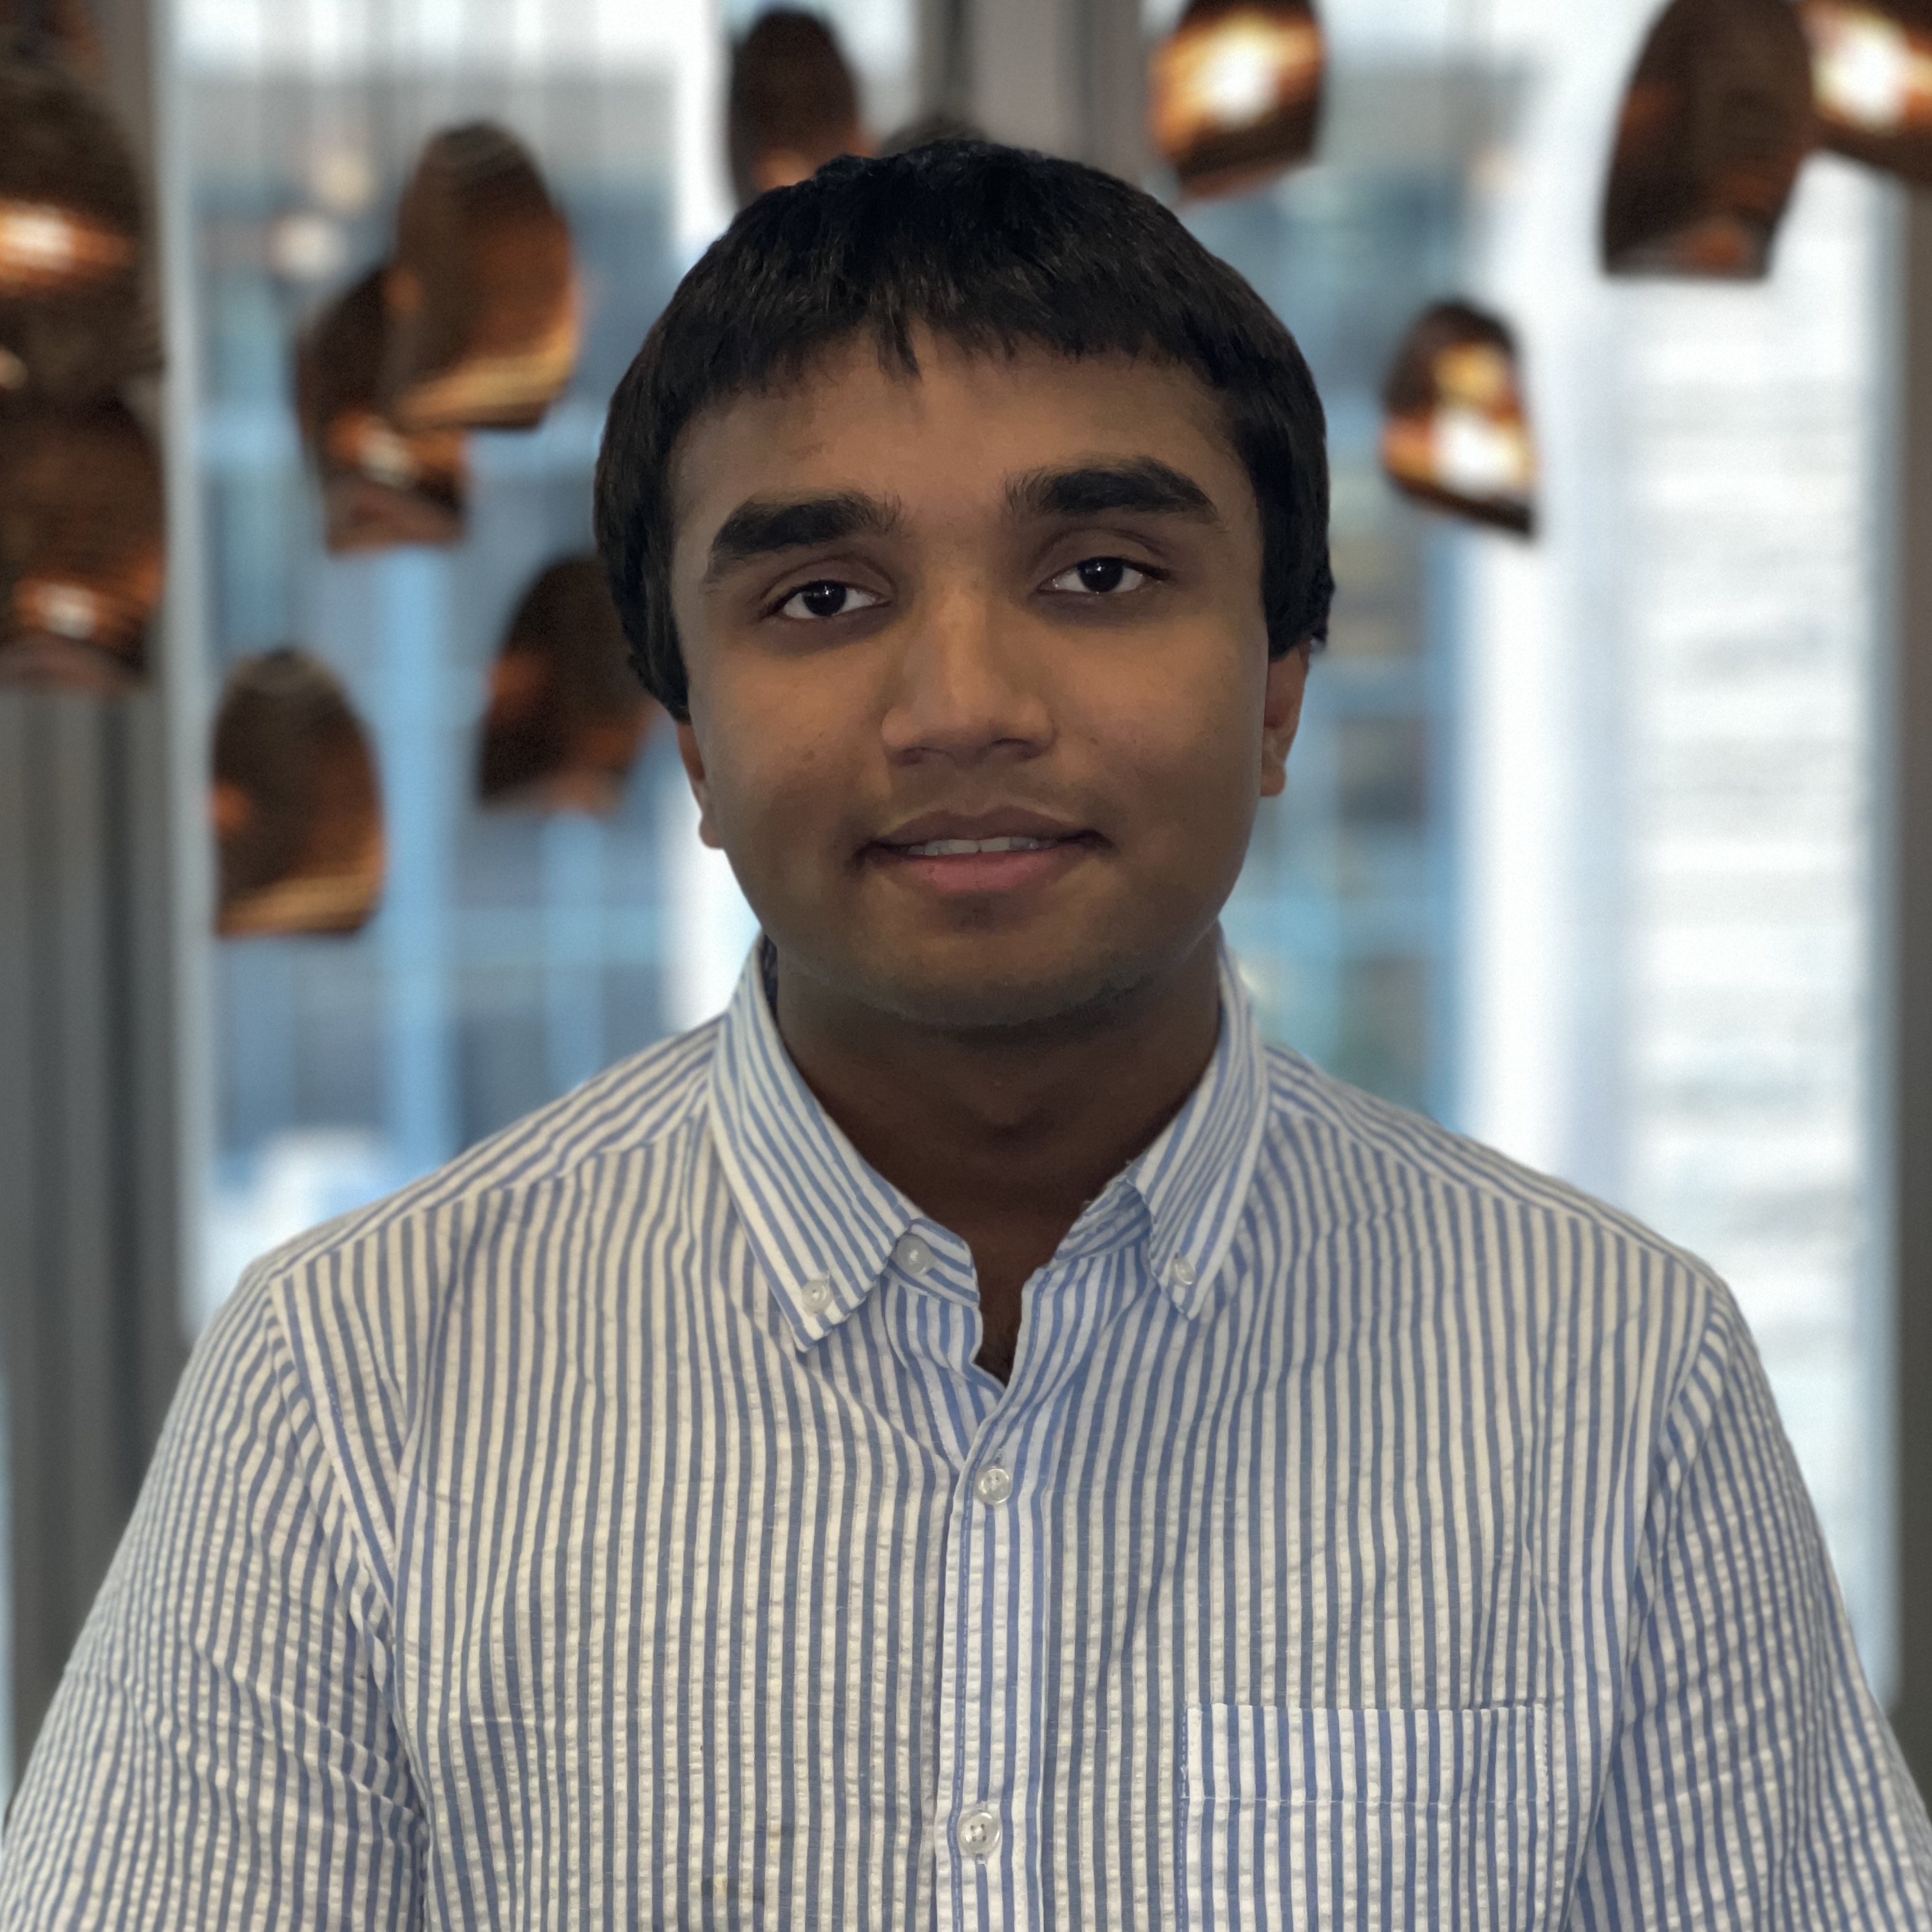 Zeeshan Razzaq is a first-year Engineering student. He joined ESWNU to understand issues in sustainability and to design solutions. He would like to build his engineering background through membership in the AutoAquaponics software team.LINKEDINLINKhttps://www.linkedin.com/in/zeeshanaarazzaq